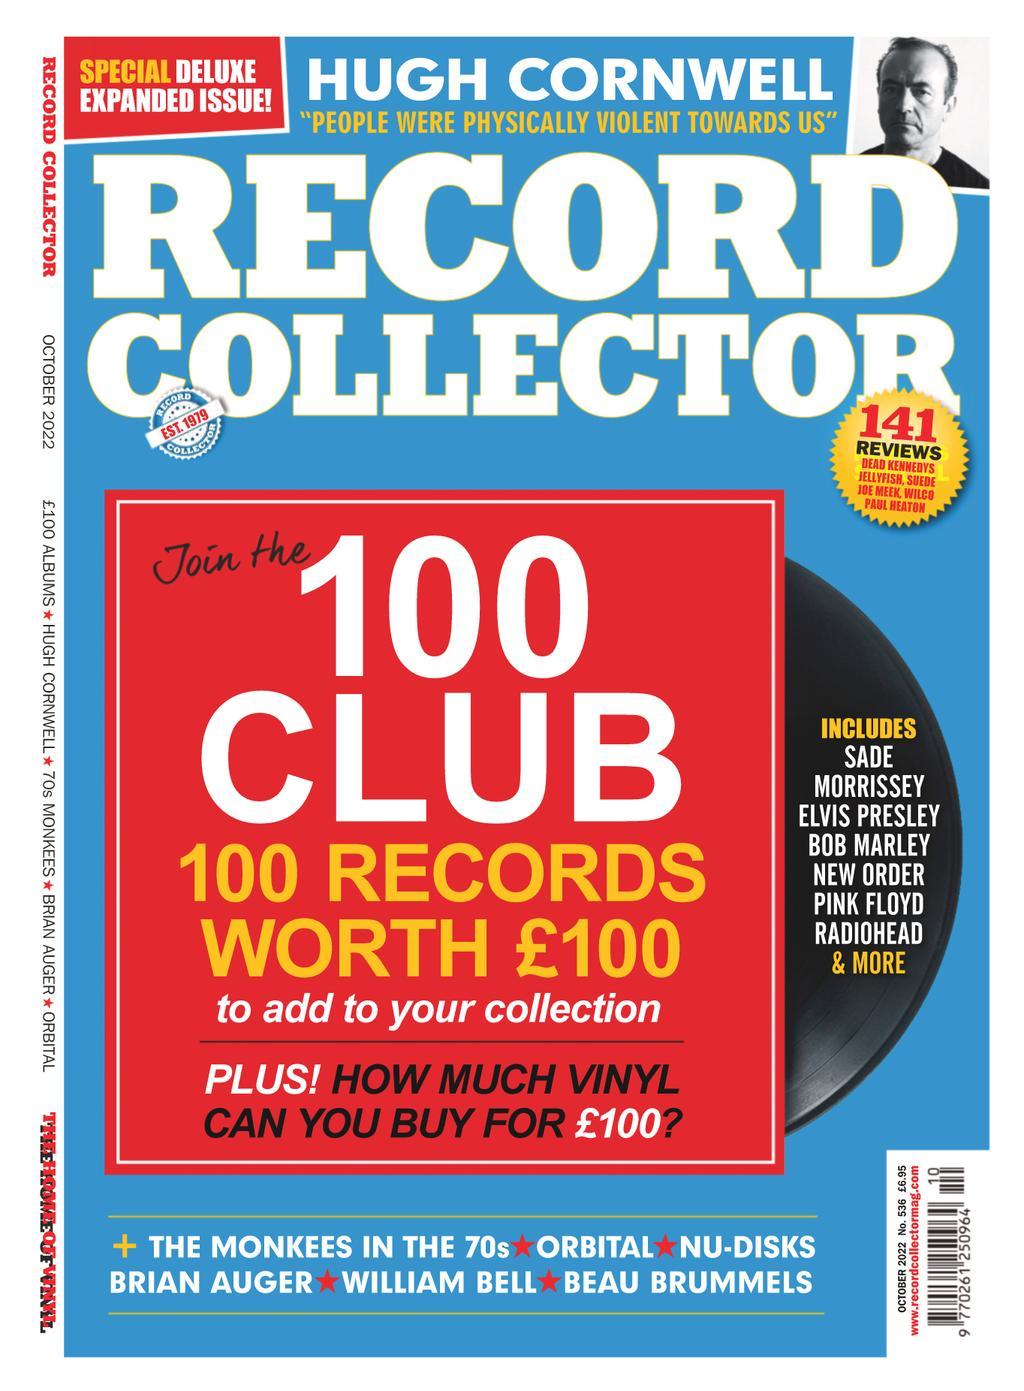 Record Collector Issue 536 (Digital) - DiscountMags.com